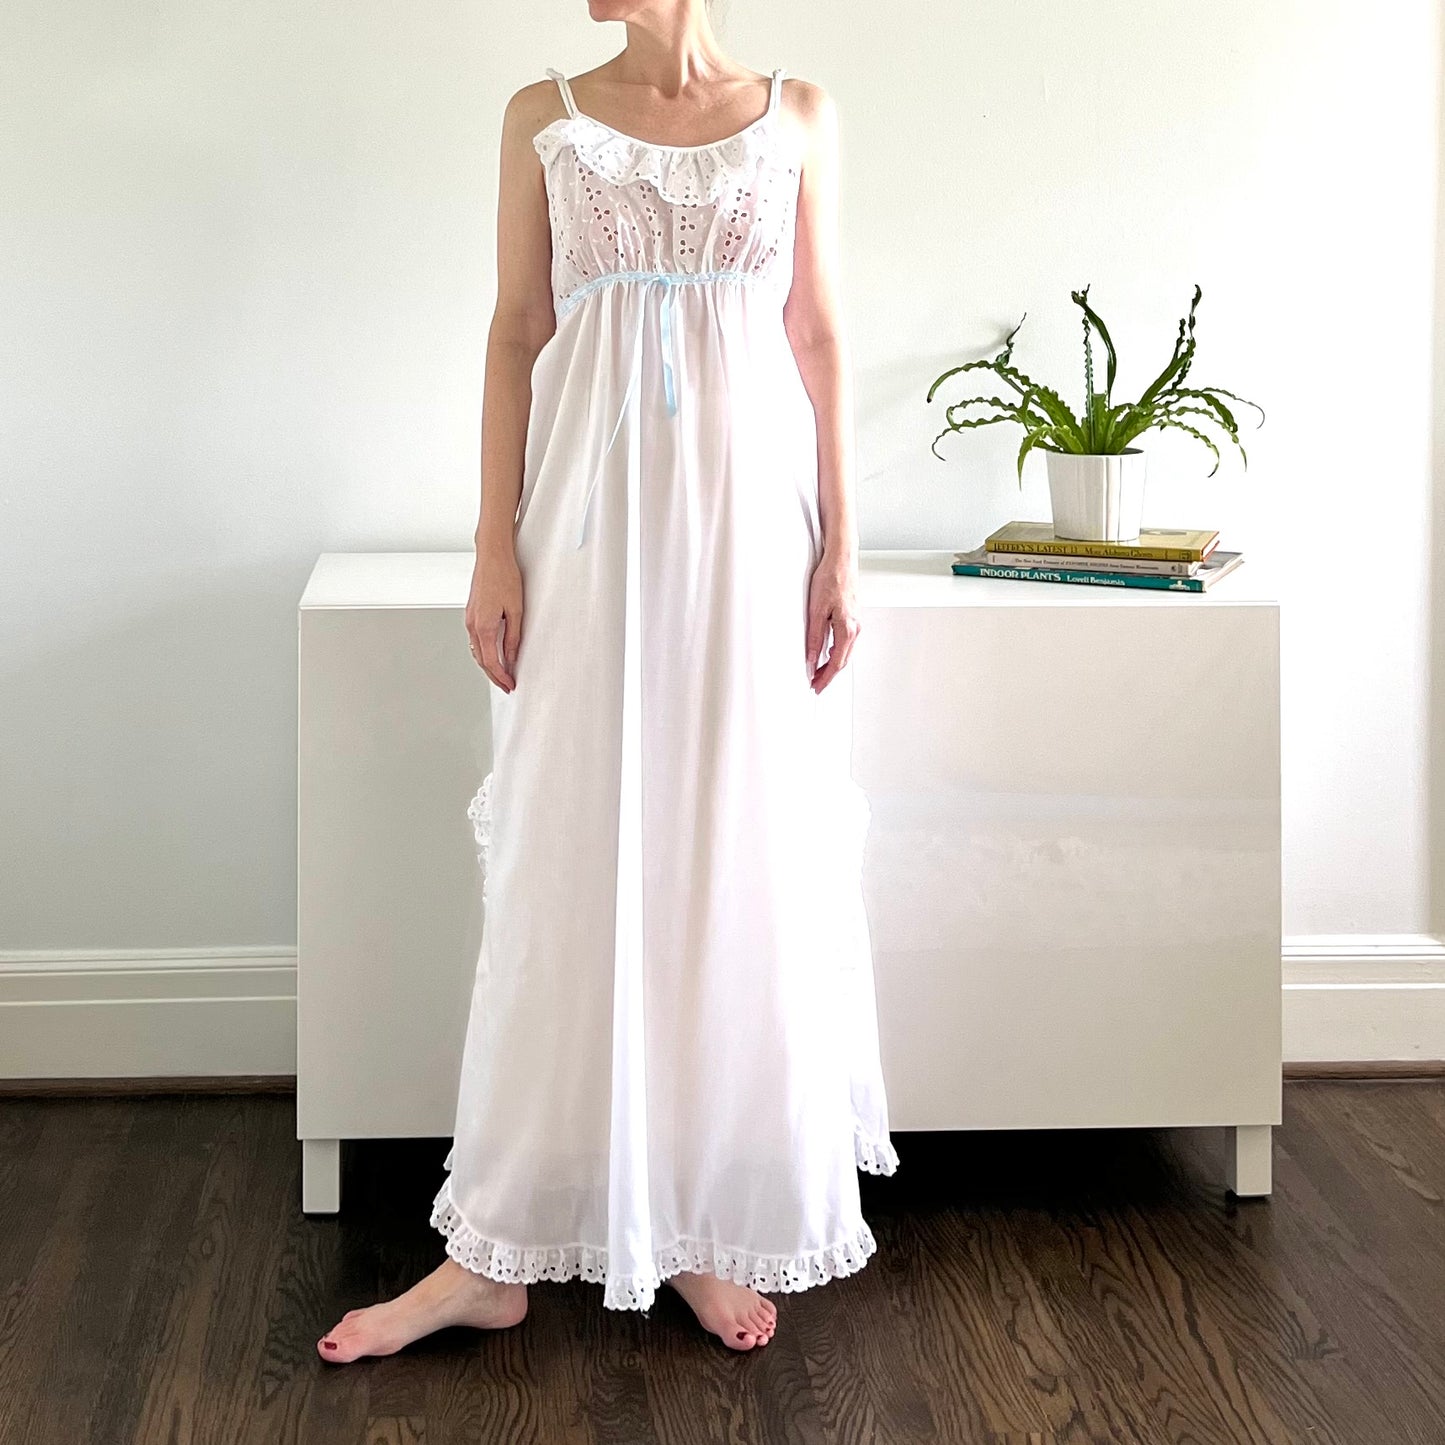 Vintage Deena of California Dentelle Nightgown and Robe Set